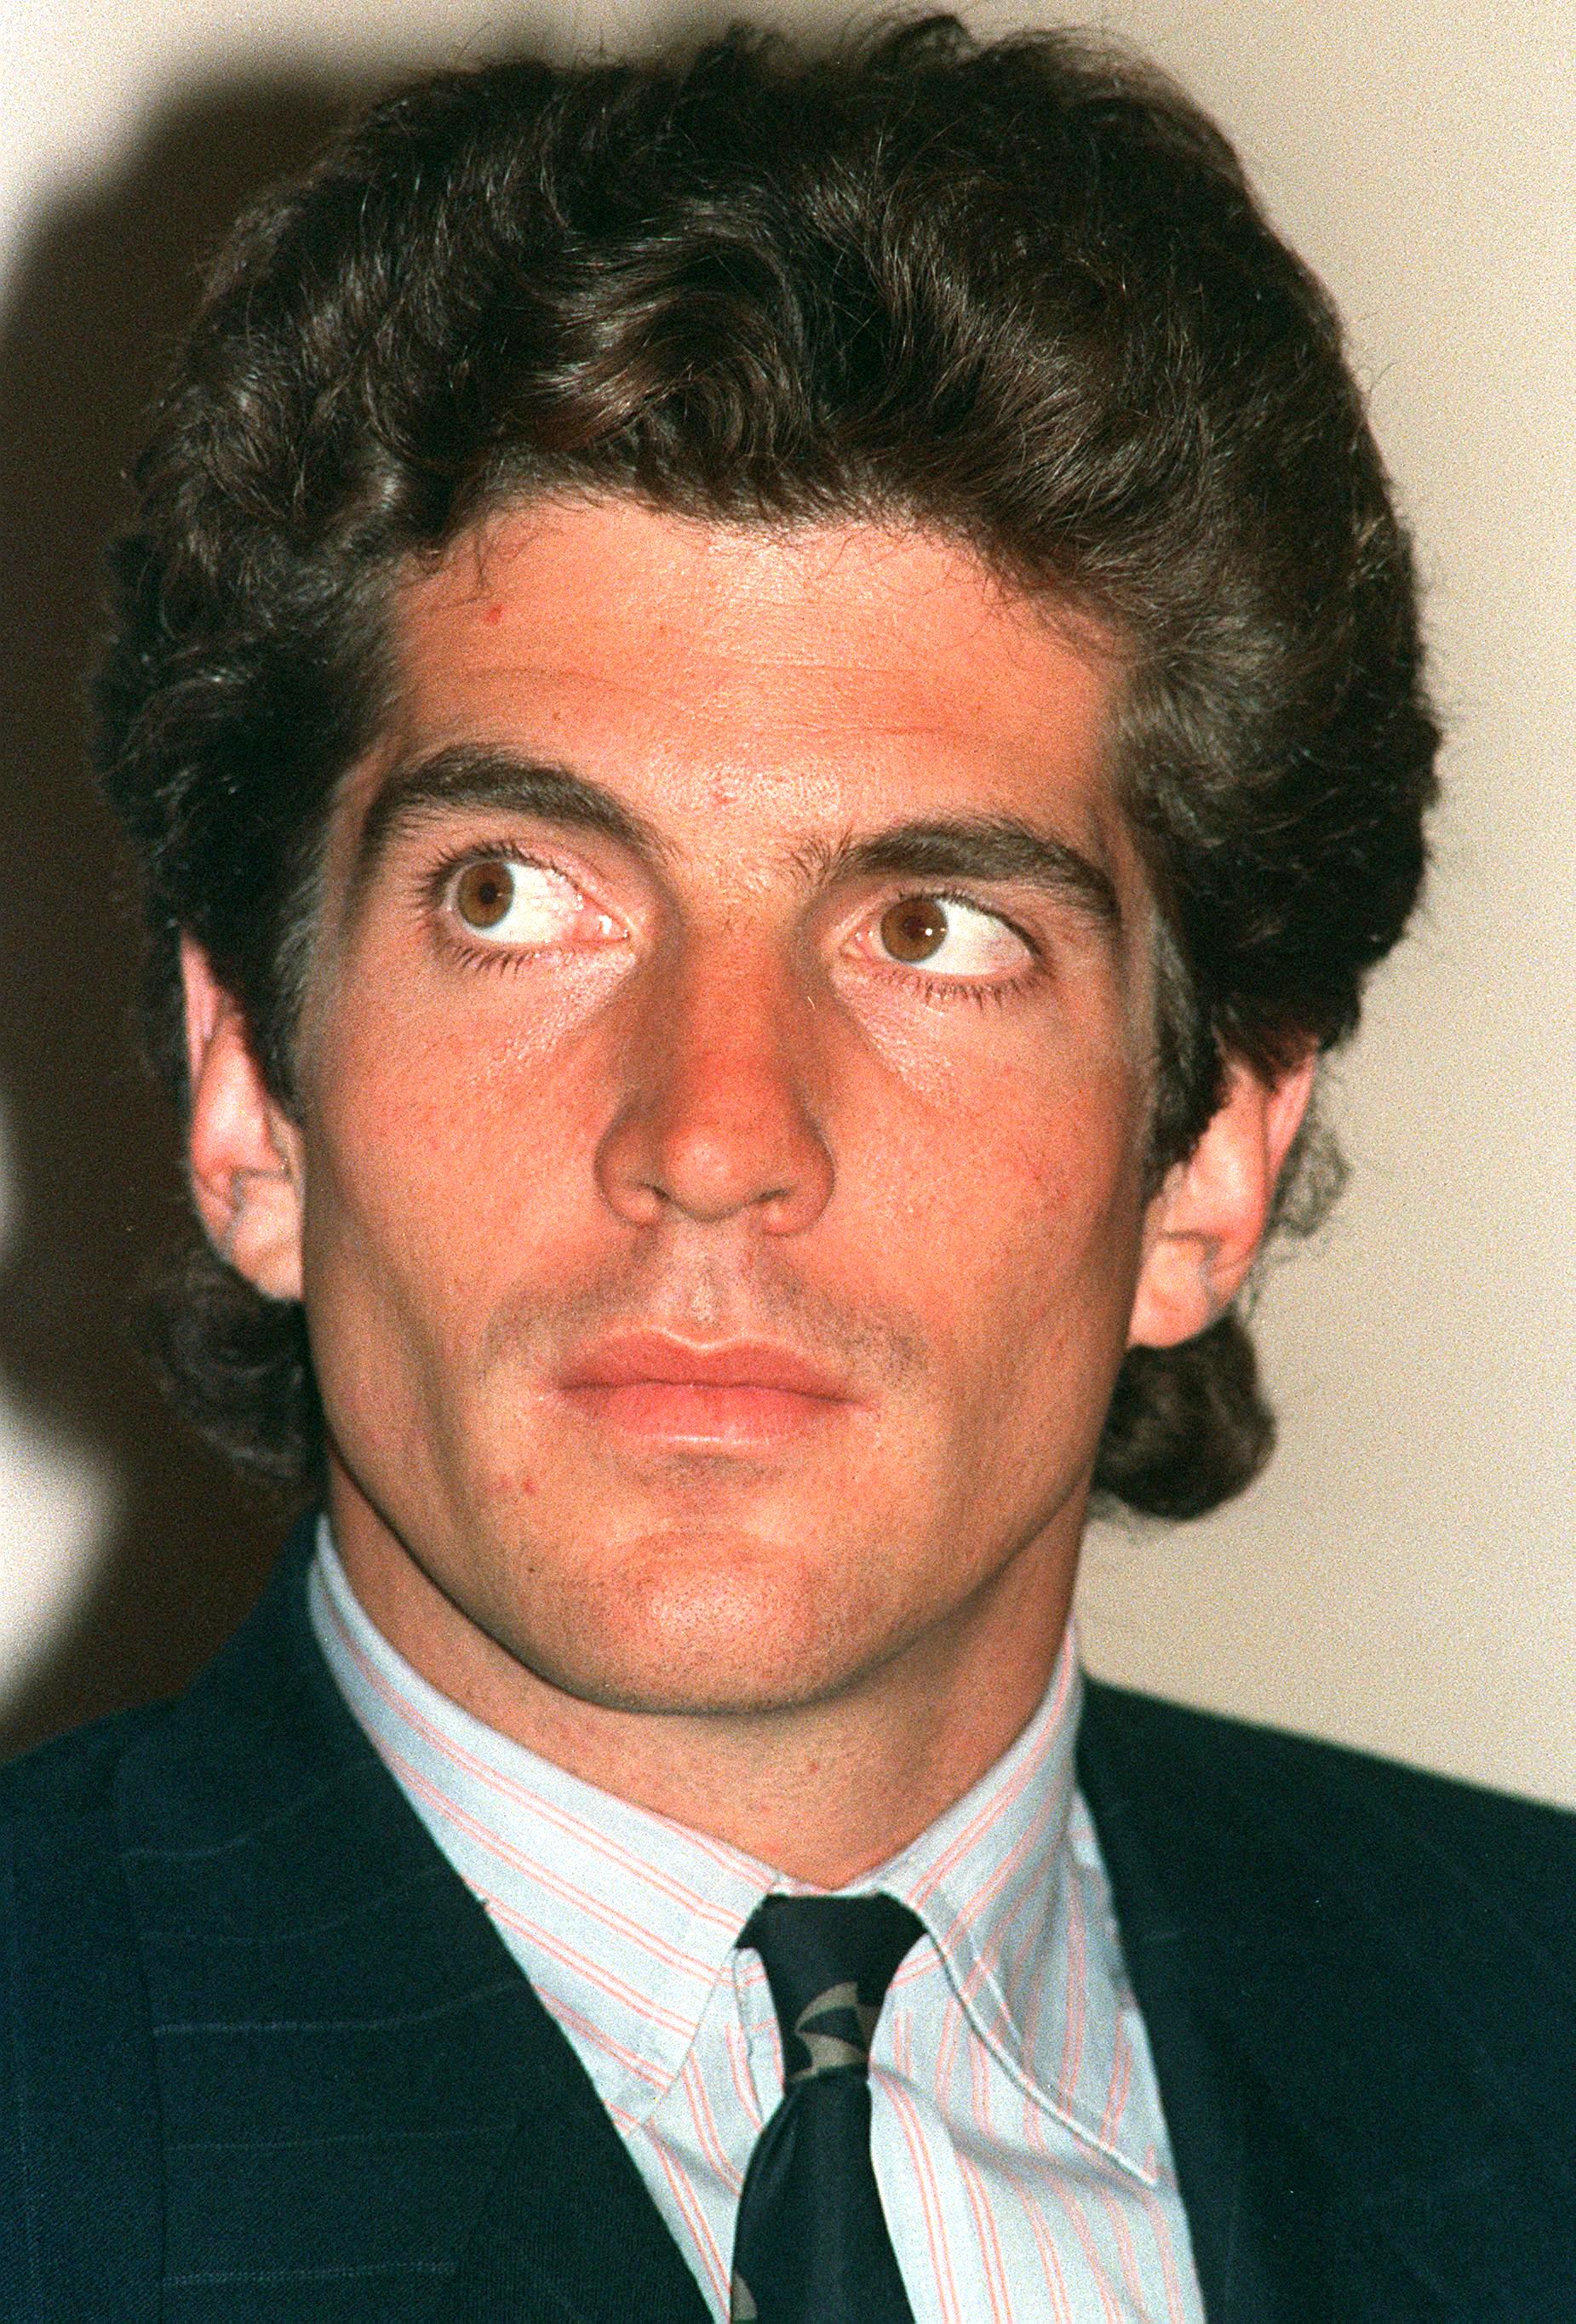 John F. Kennedy Jr. in New York on May 5, 1989 | Source: Getty Images